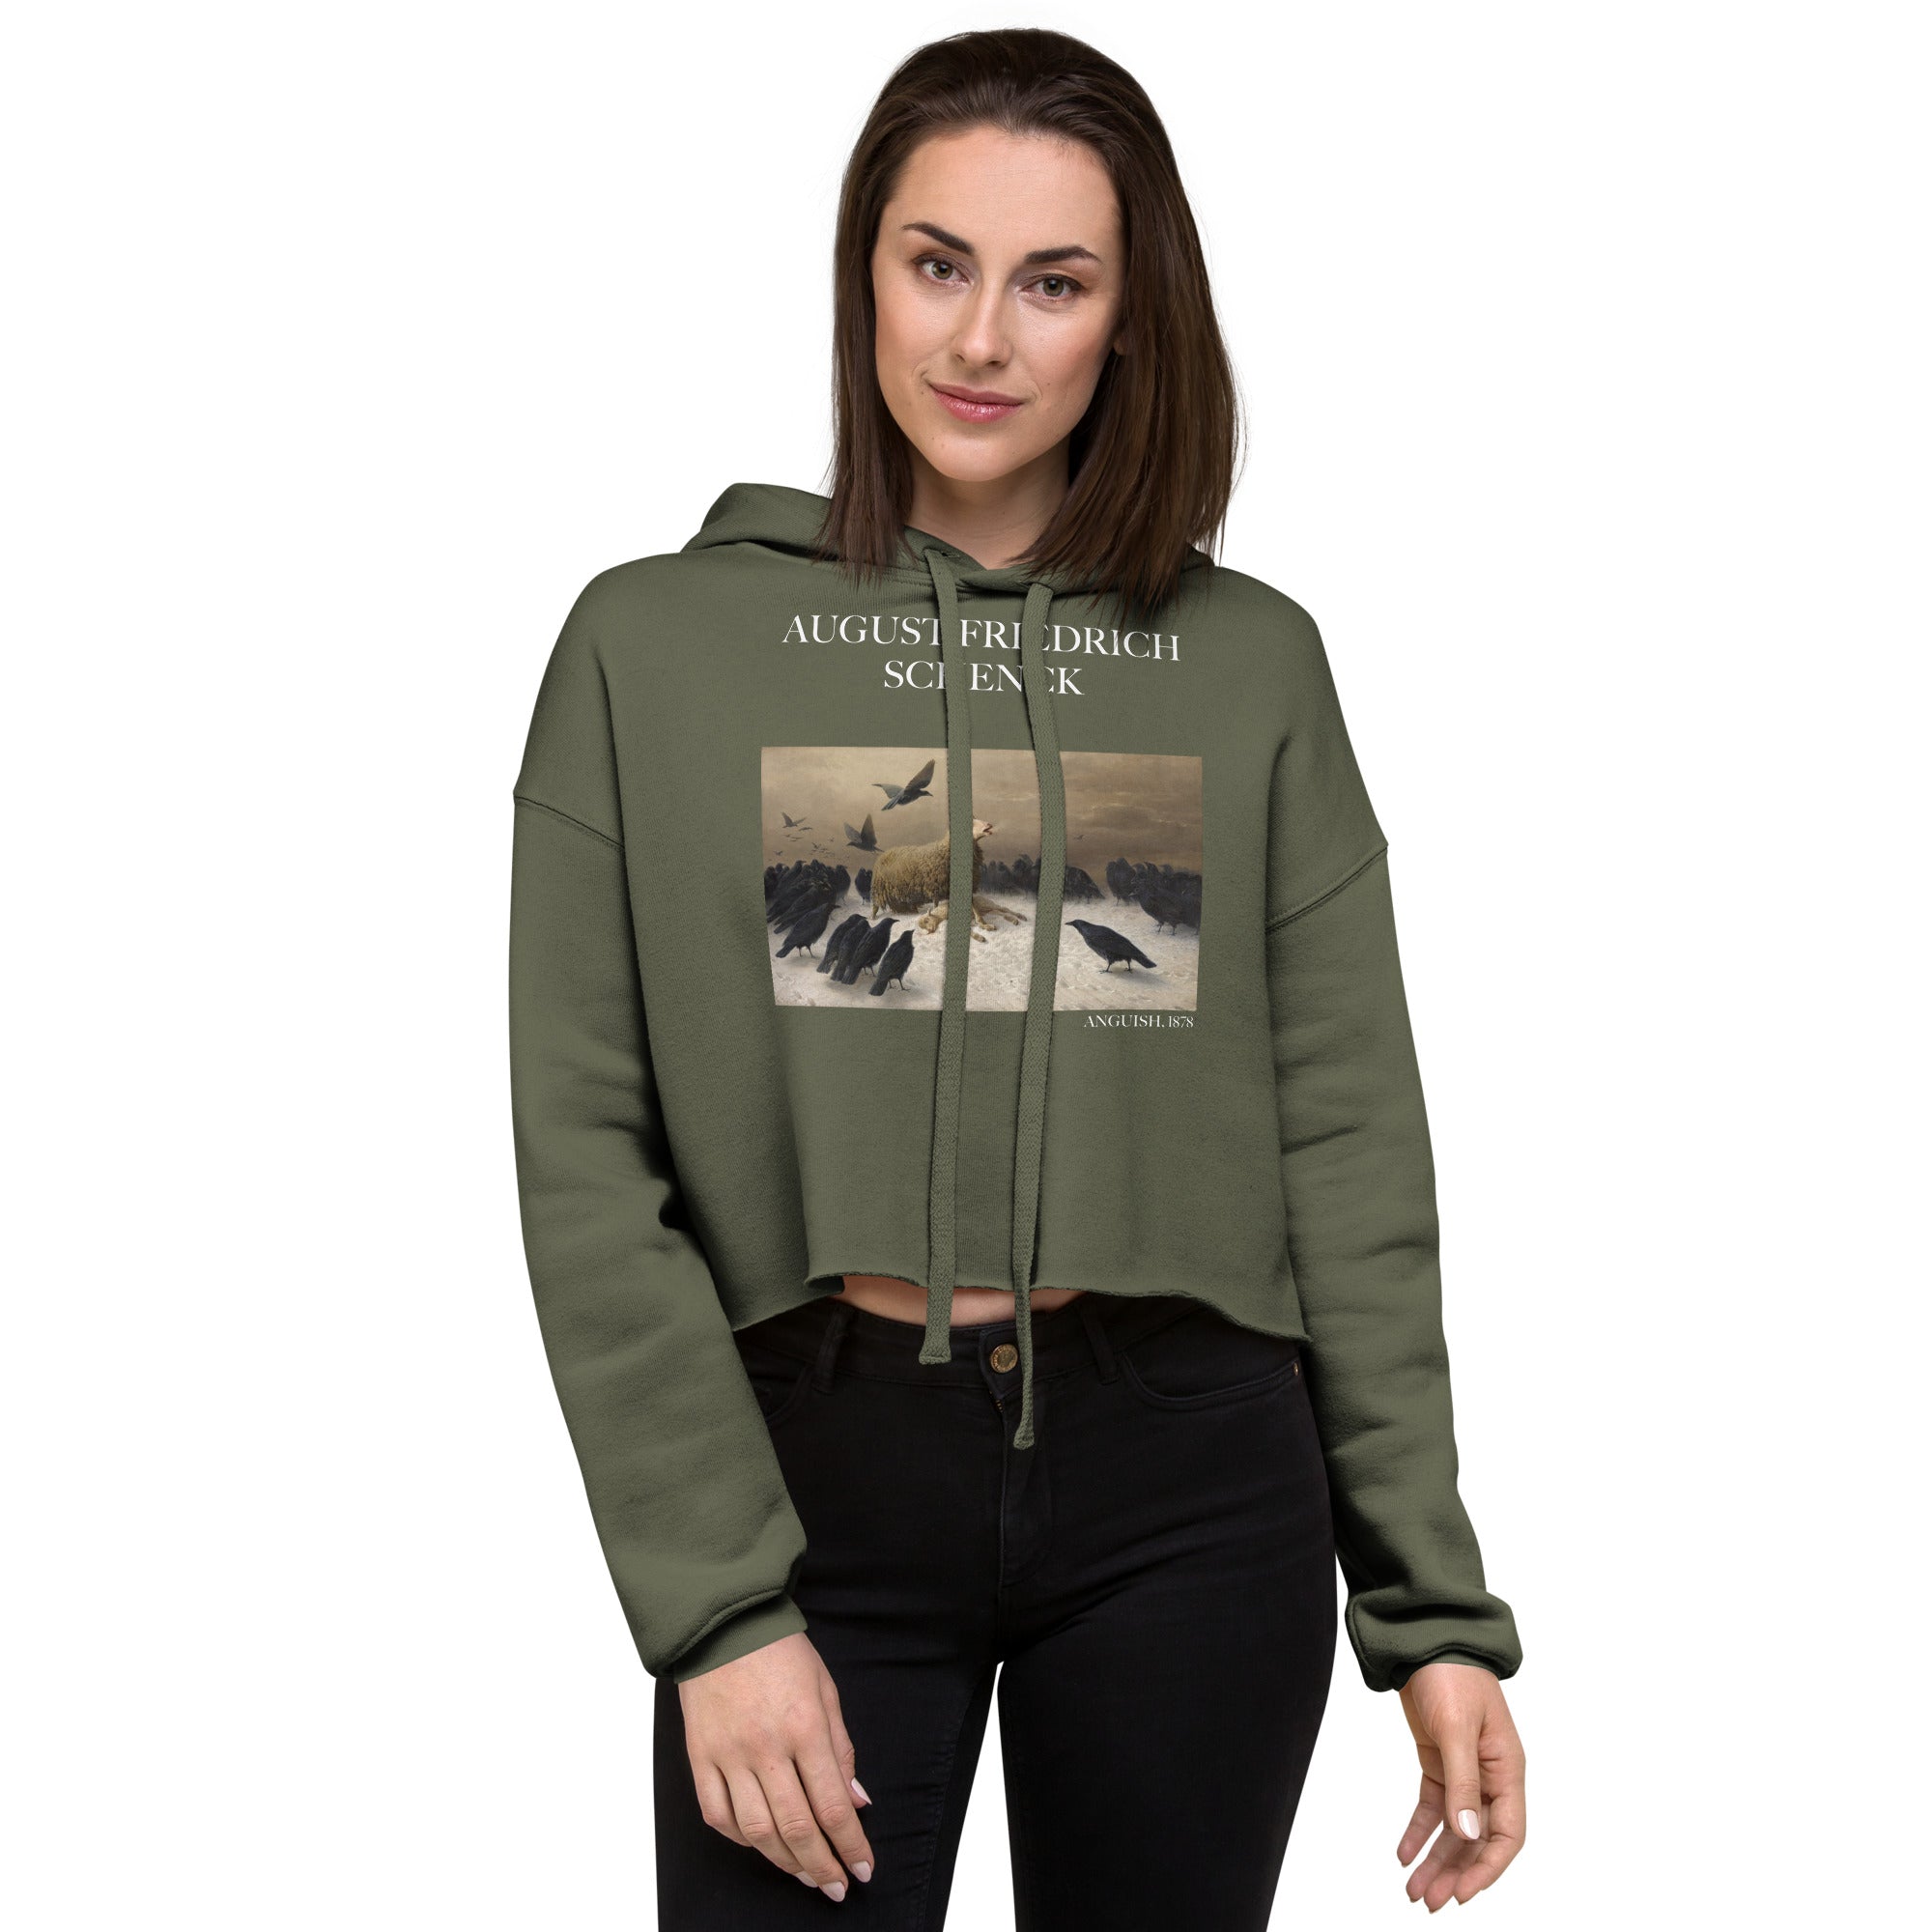 August Friedrich Schenck 'Anguish' Famous Painting Cropped Hoodie | Premium Art Cropped Hoodie